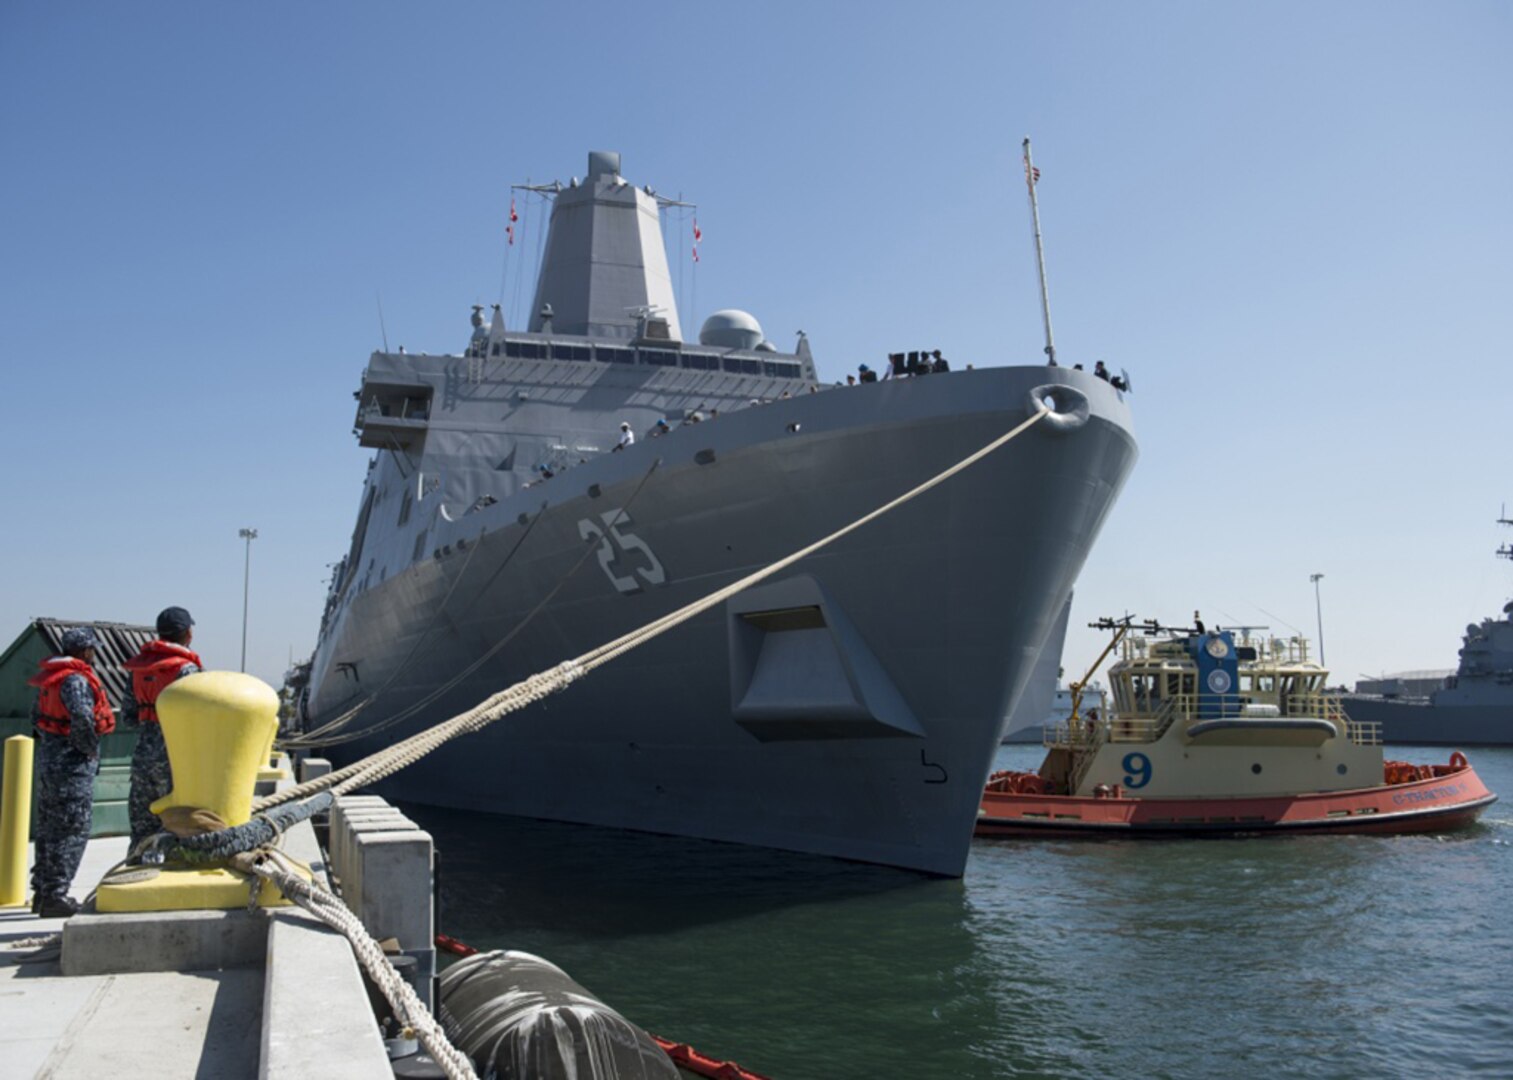 Line handlers assigned to Naval Station San Diego wait to release the mooring lines of the amphibious transport dock ship USS Somerset (LPD 25), as it prepares to depart for a scheduled deployment. Somerset is a part of the Makin Island Amphibious Ready Group, which will serve in the U.S. 3rd, 5th, and 7th Fleet area of operation, providing maritime security operations, crisis response capability, theater security cooperation and forward naval presence.